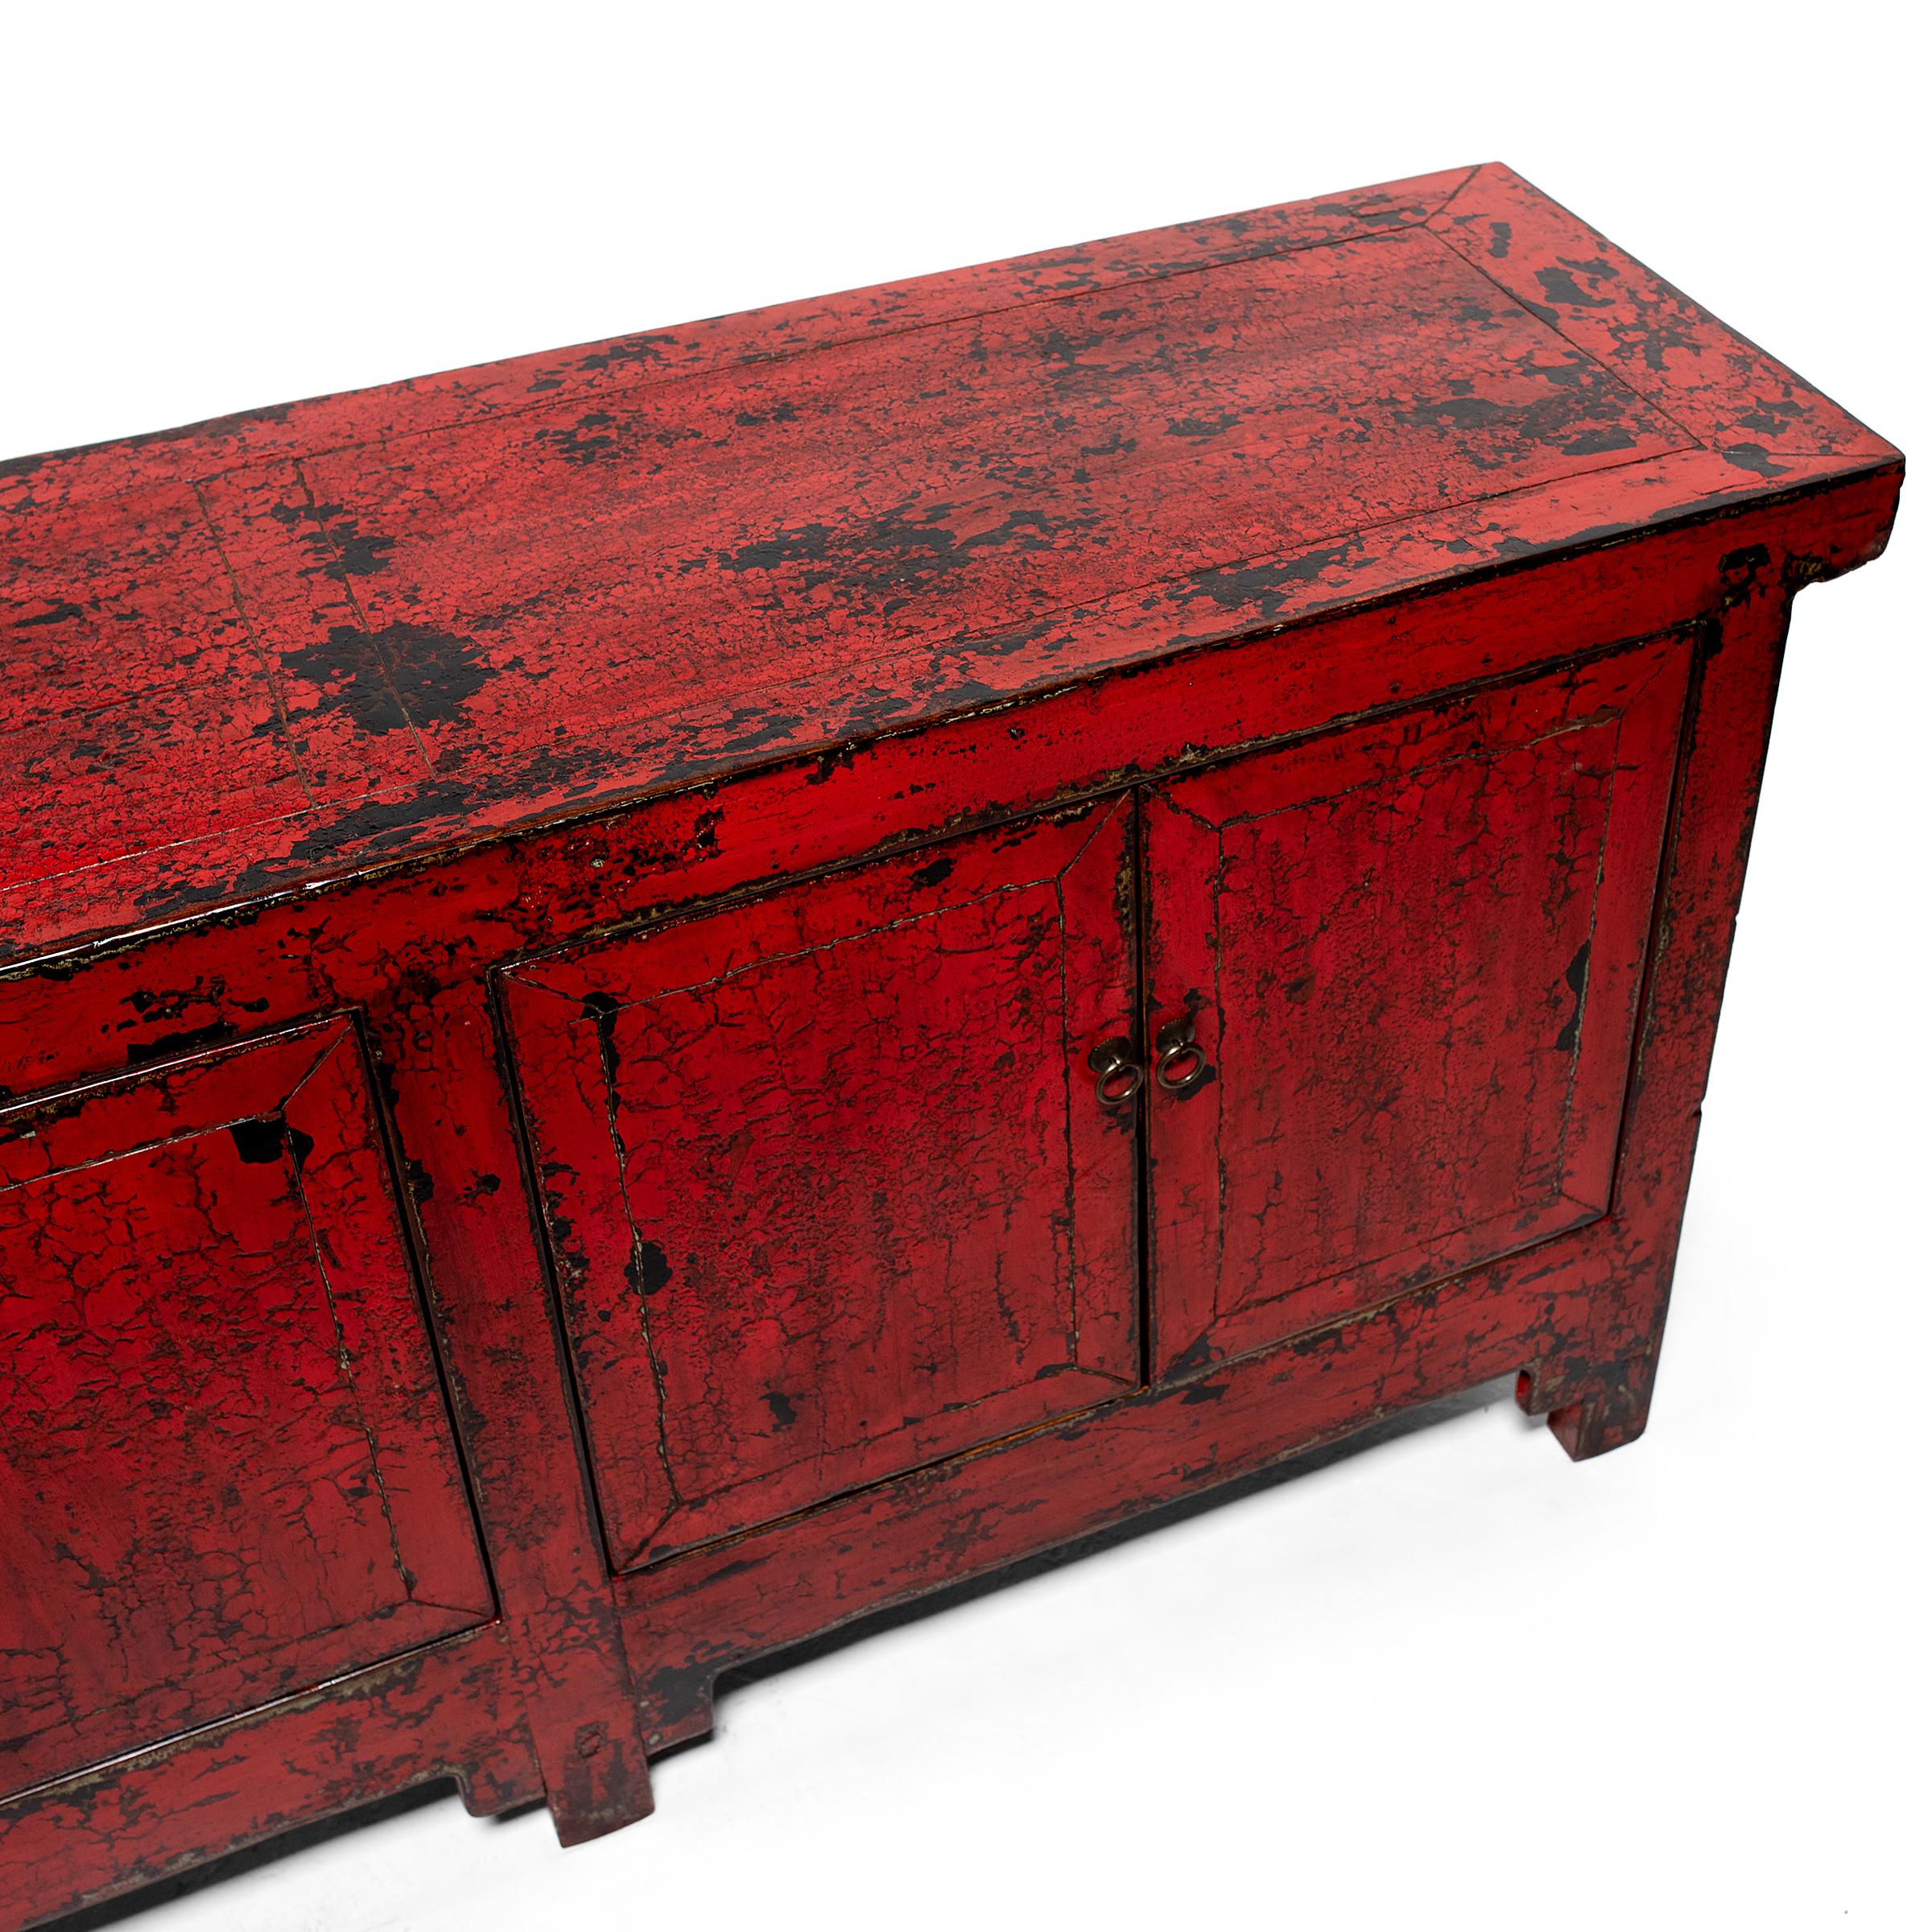 Lacquered Chinese Red Lacquer Grasslands Coffer, c. 1900